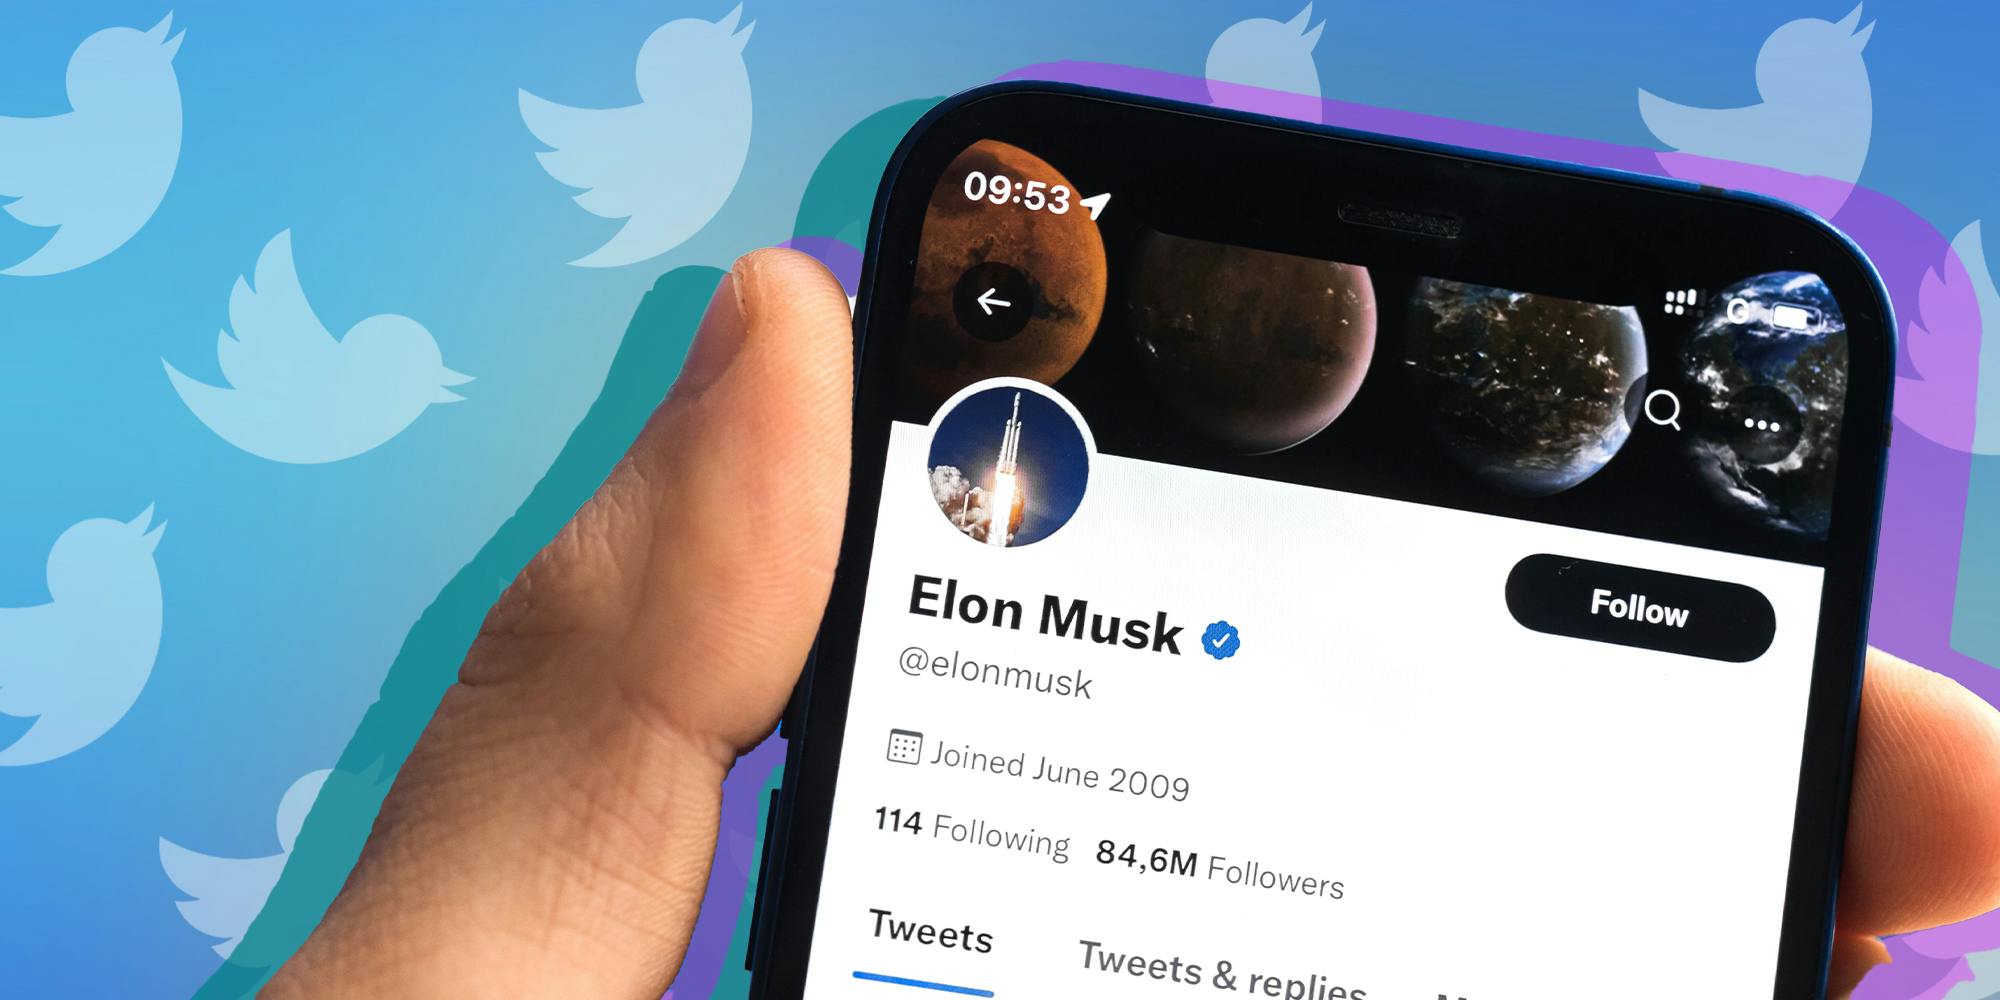 Why on Earth did Elon Musk throttle Twitter views?